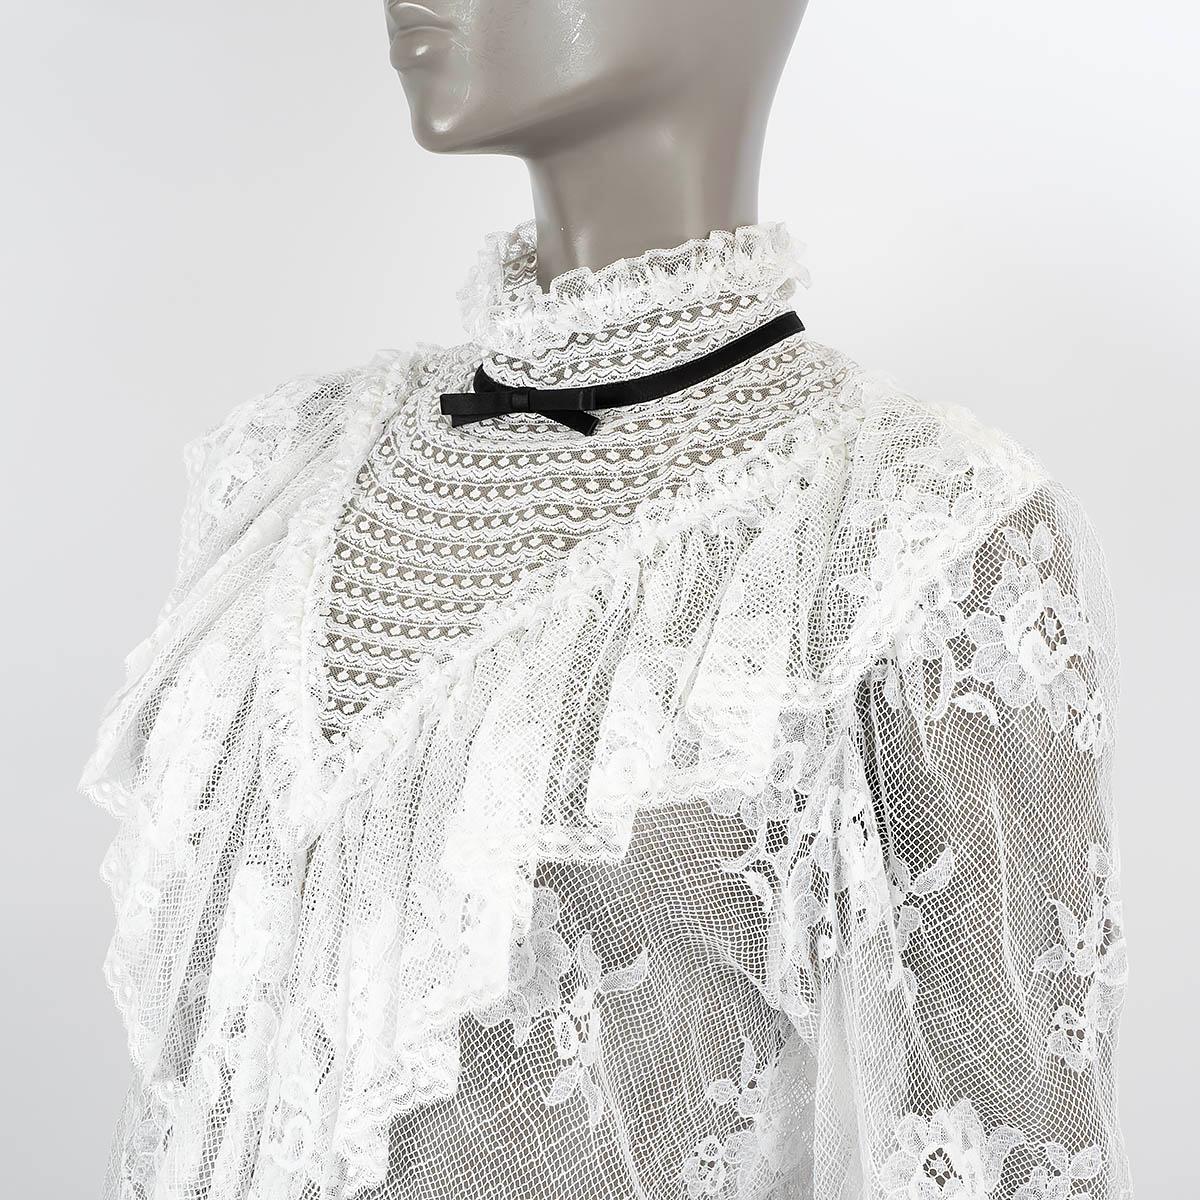 MIU MIU white cotton 2019 SHEER RUFFLED FLORAL LACE MOCK NECK Blouse Shirt S For Sale 2